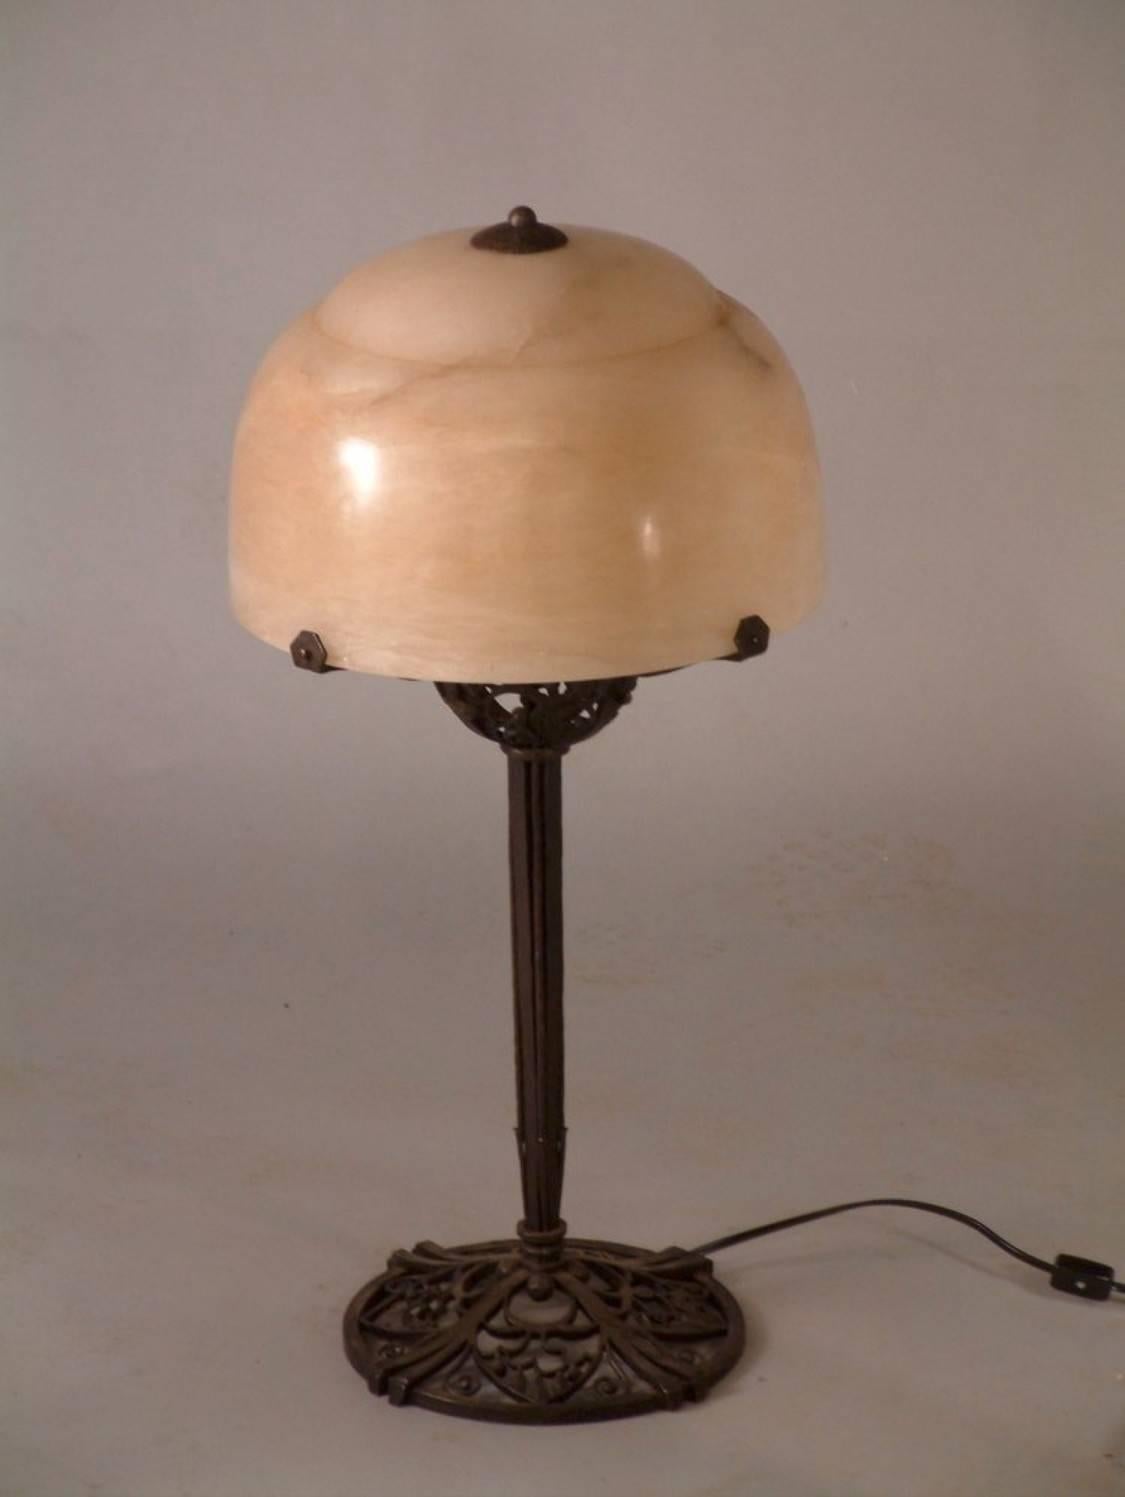 Classic French Art Deco table lamp in forged iron with alabaster shade by Raymond Subes, circa 1923. Measures: About 25